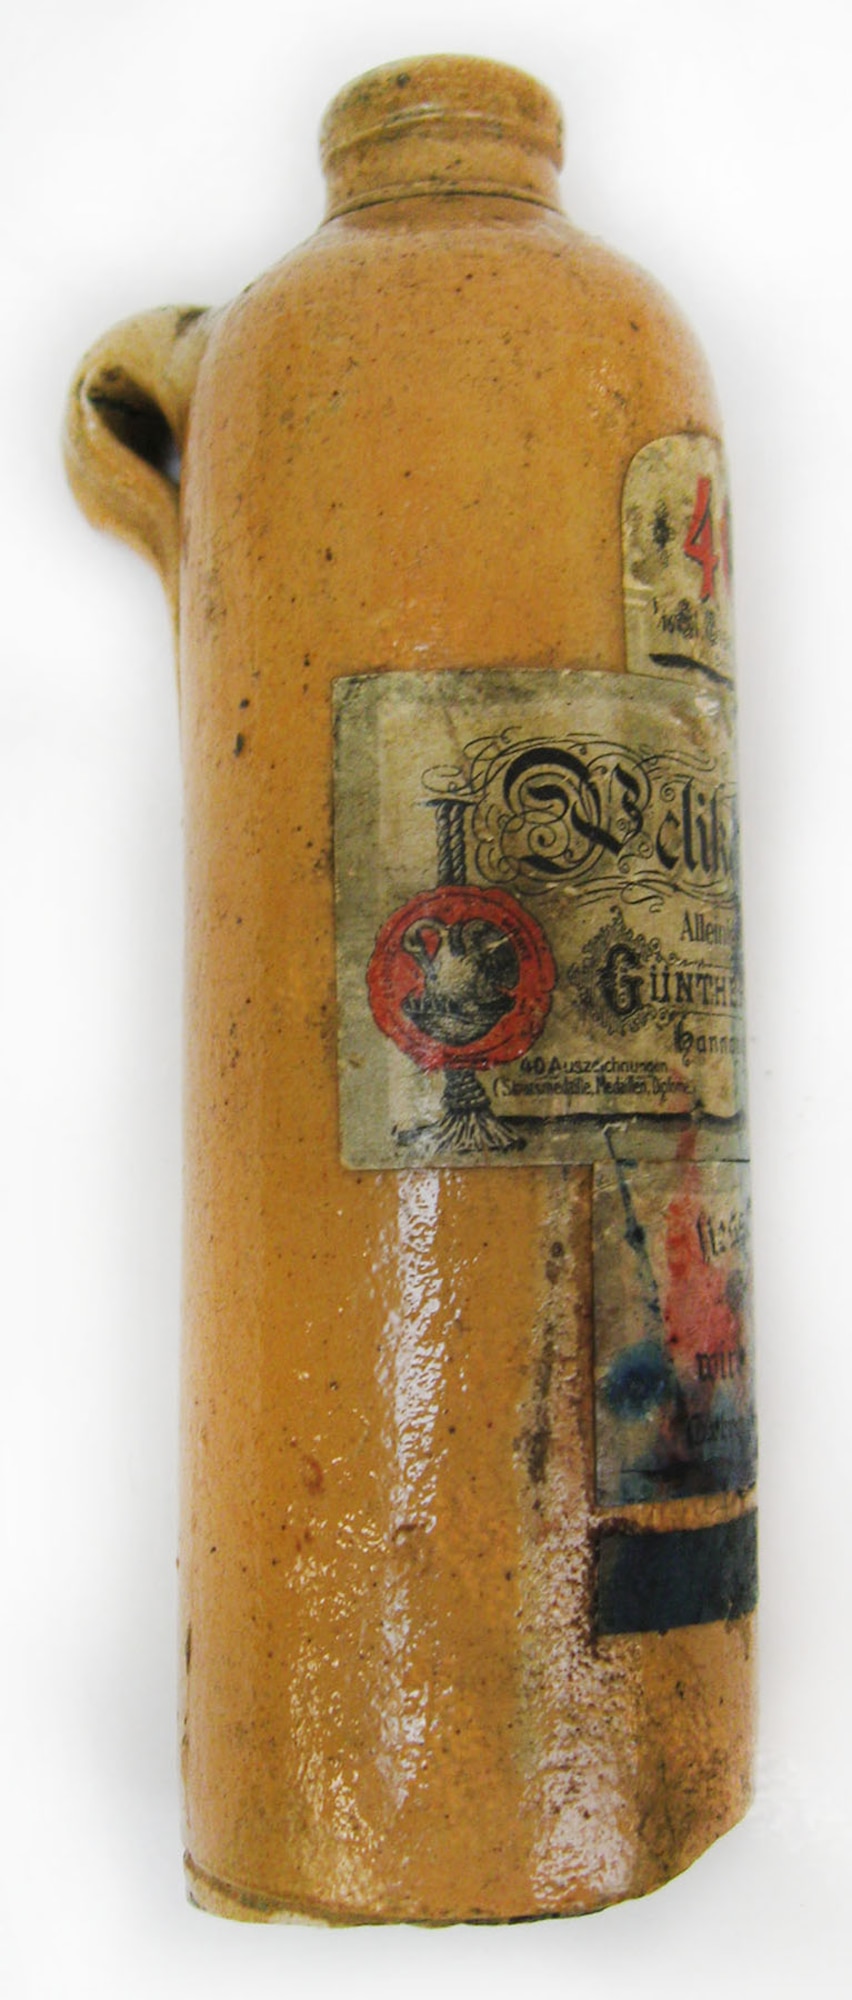 This is a clay ink bottle that once contained blue 4001 ink produced by Pelikan. Around the time of World War I, blue 4001 was the most popular ink color sold by Pelikan. (U.S. Air Force photo)